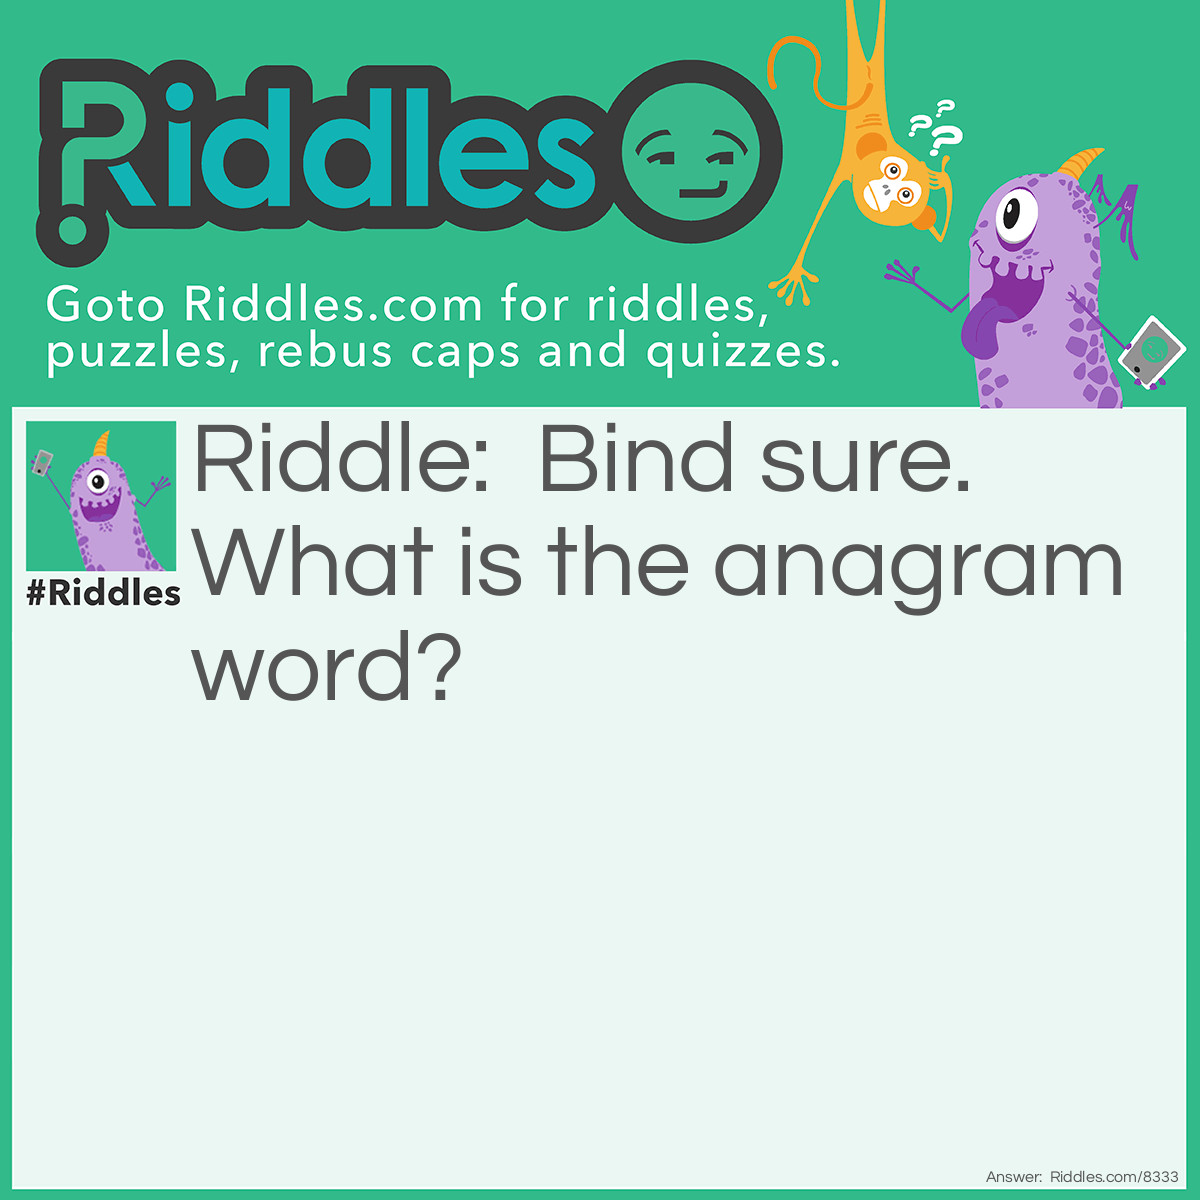 Riddle: Bind sure. What is the anagram word? Answer: Burnside.